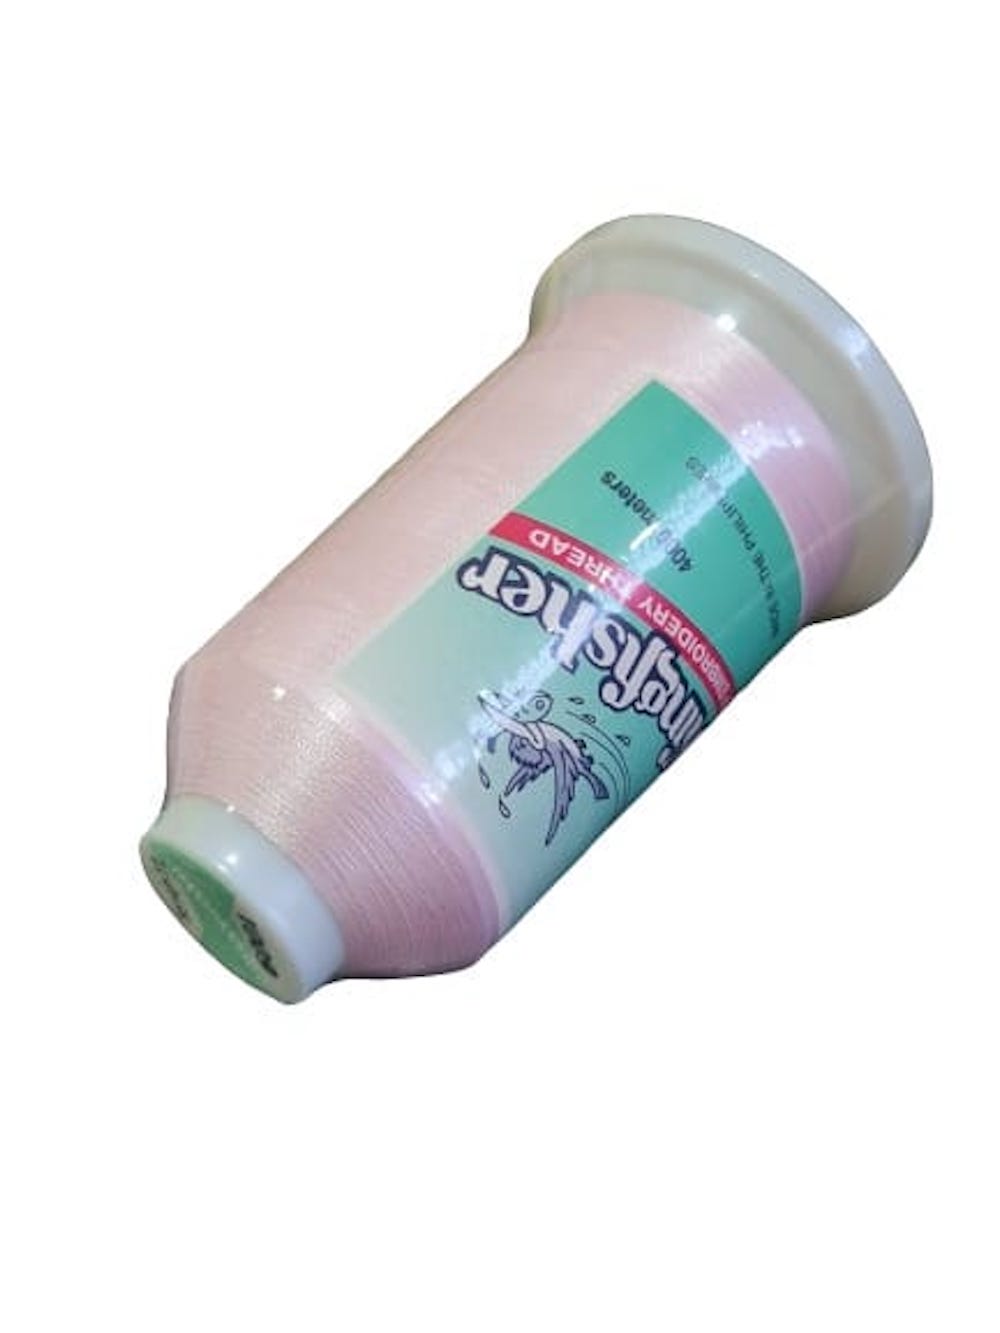 King Fisher Embroidery Thread 4000m 6001 - MY SEWING MALL